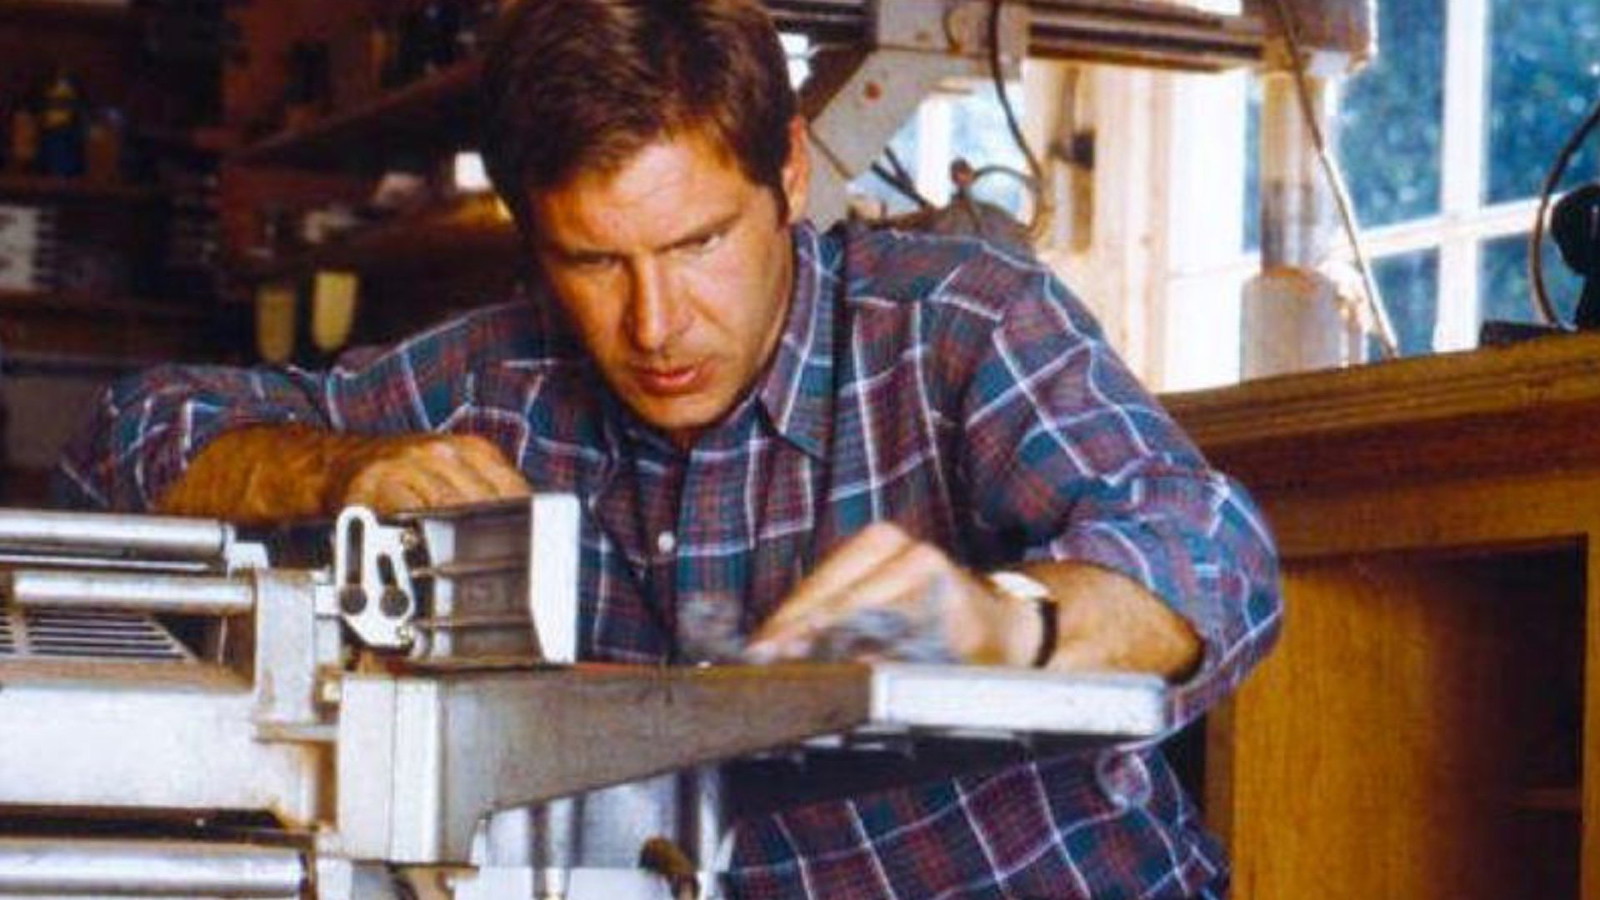 Harrison Ford get his big break in Star Wars when he was working as a carpenter